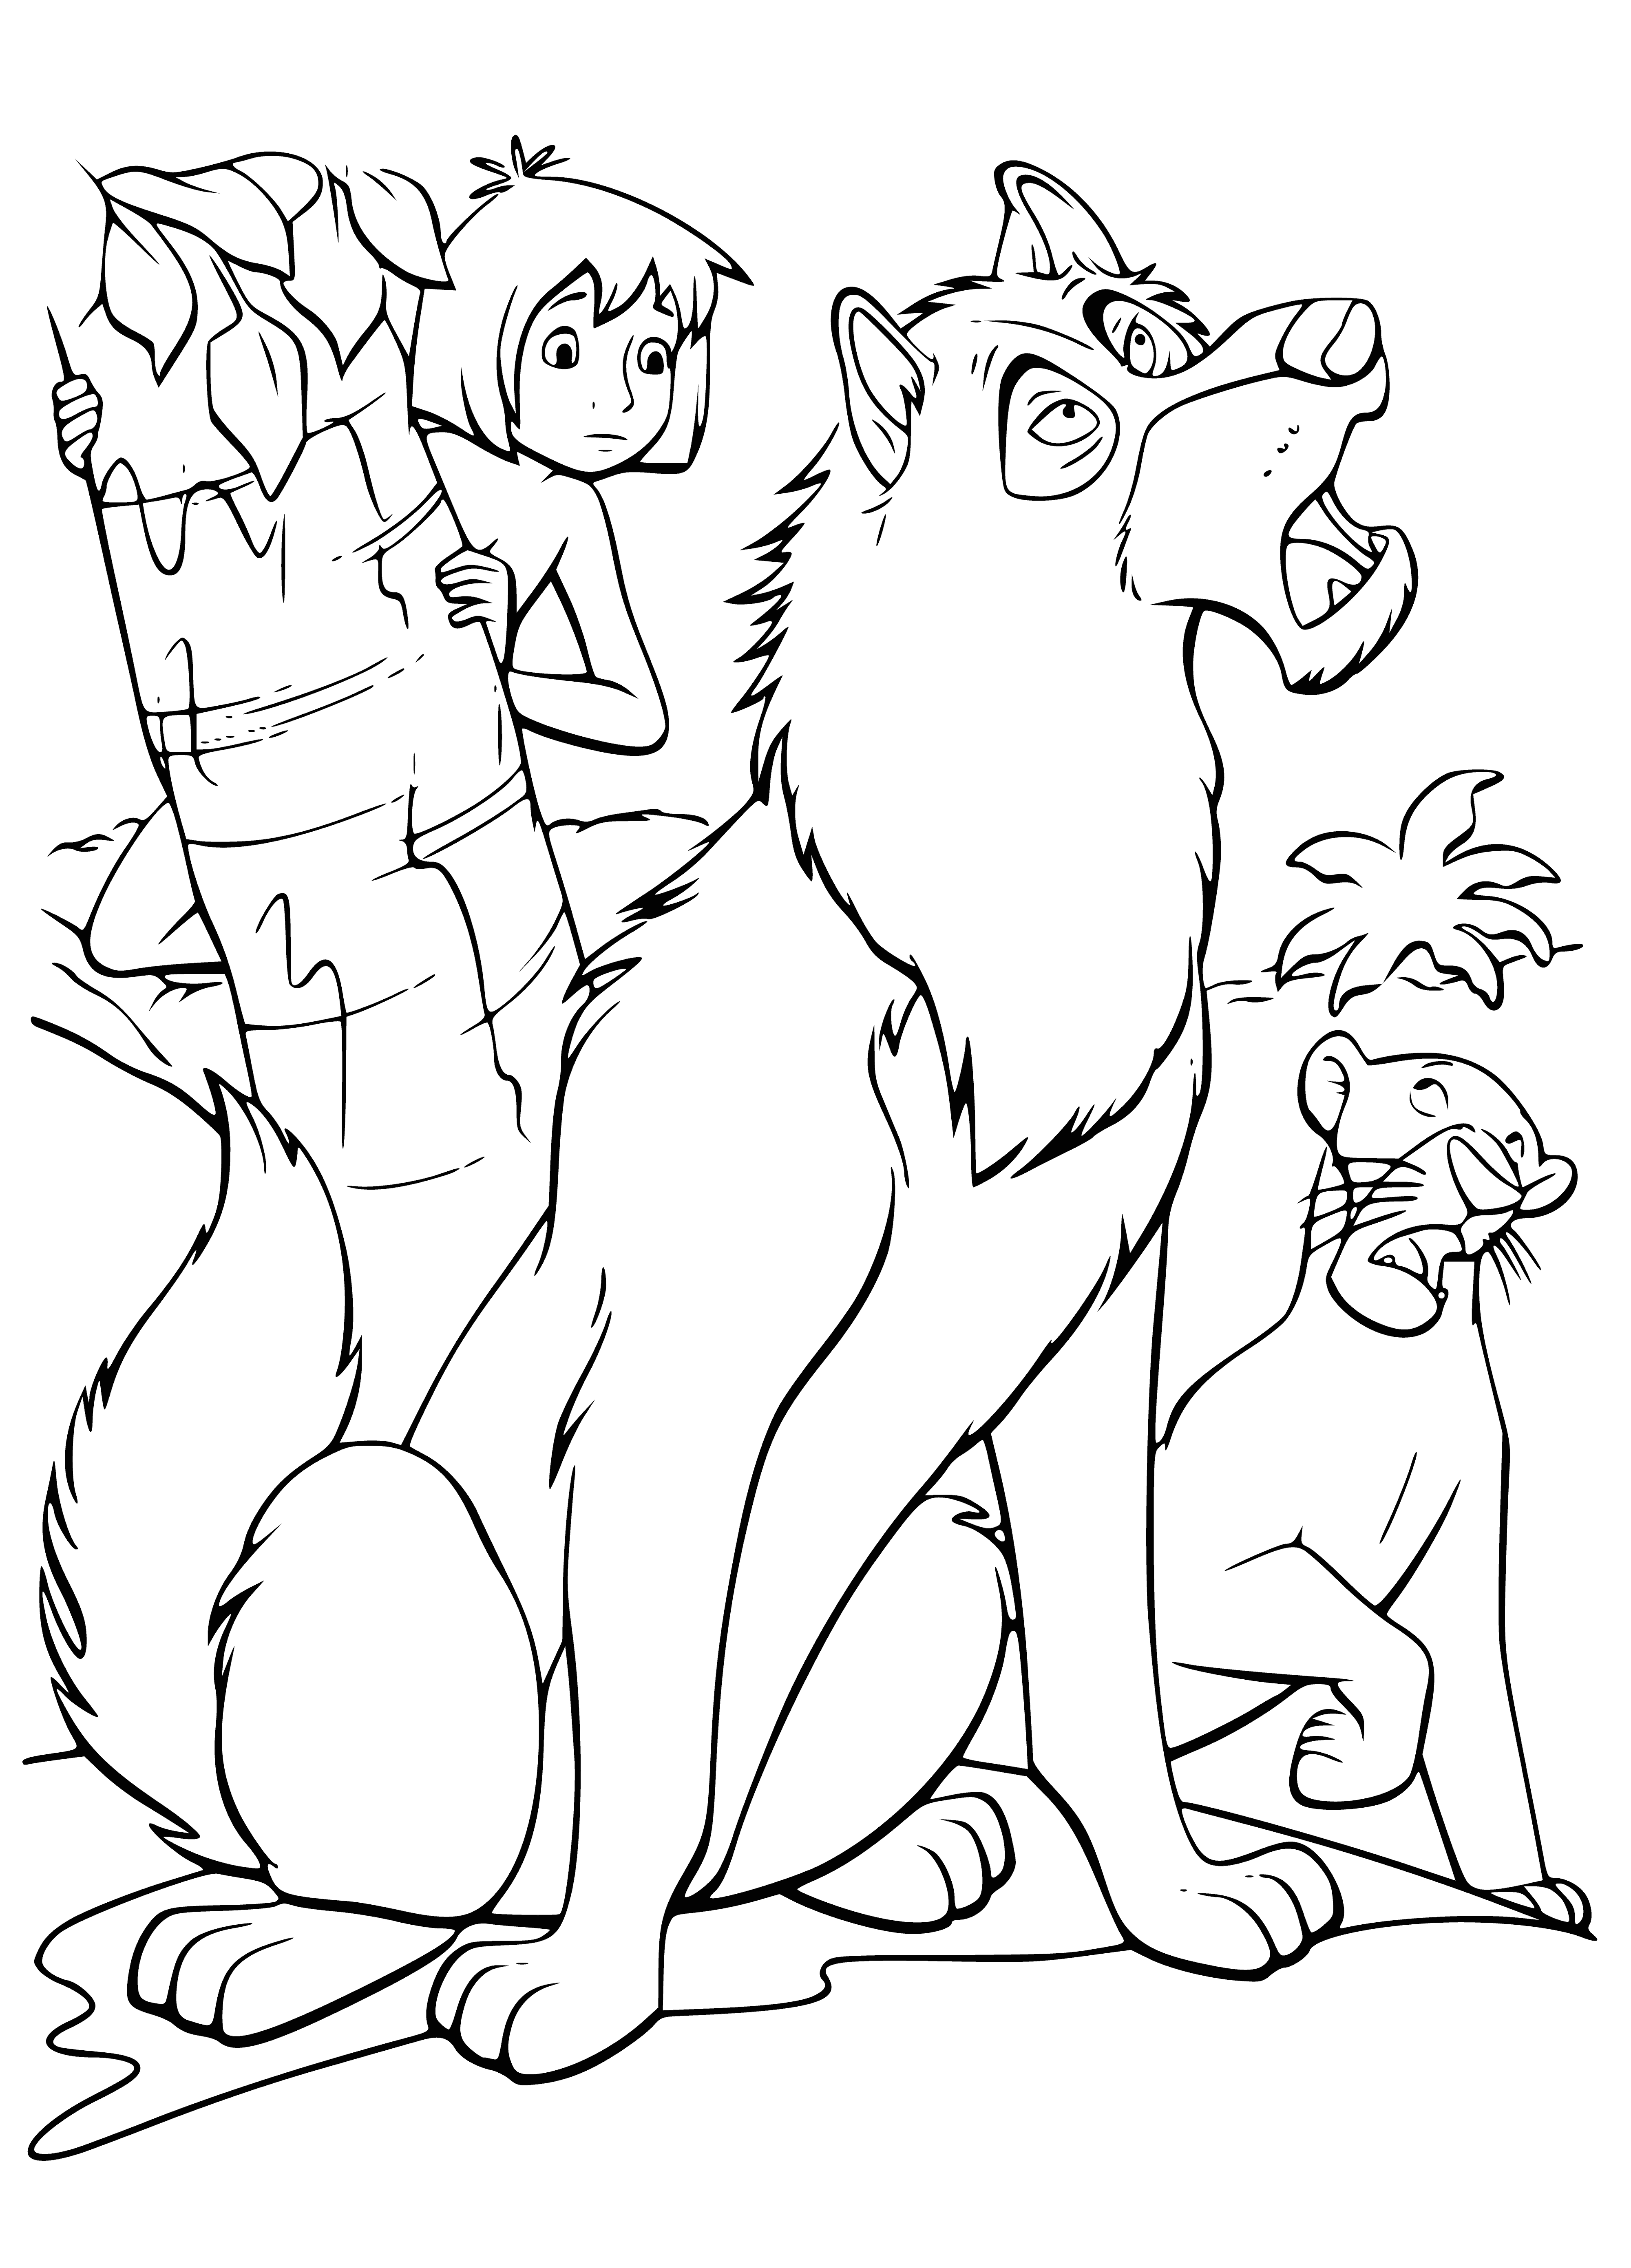 Mowgli and the wolf coloring page